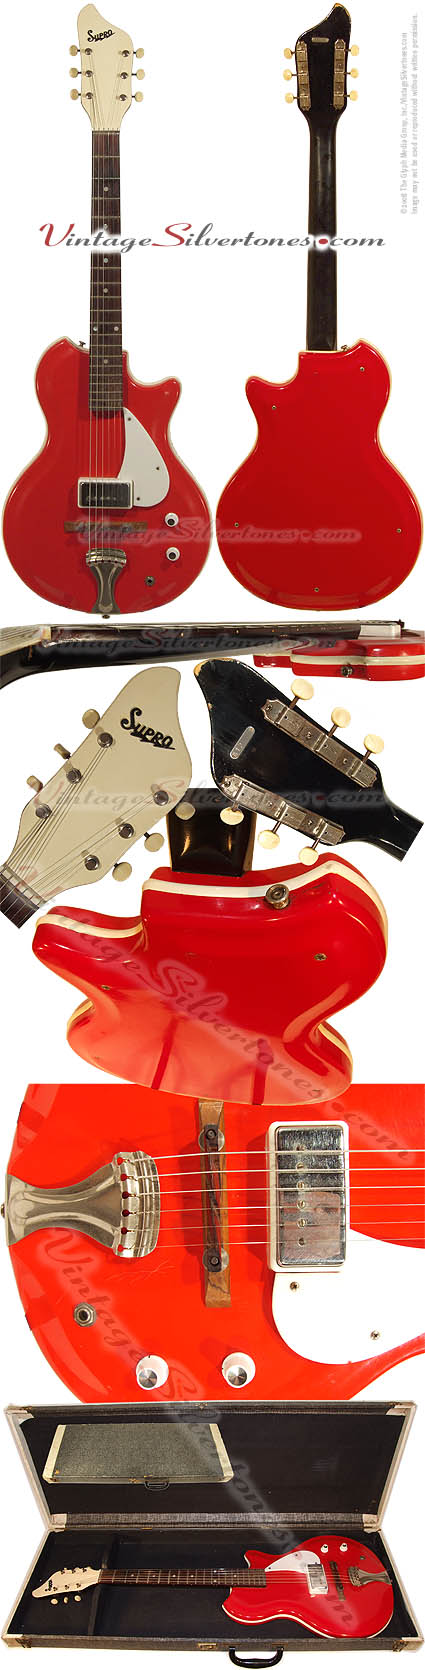 Supro Sahara model S470, red, reso-glas, semi-hollow body, electric guitar made by Supro/National/Valco of Chicago, IL in 1963